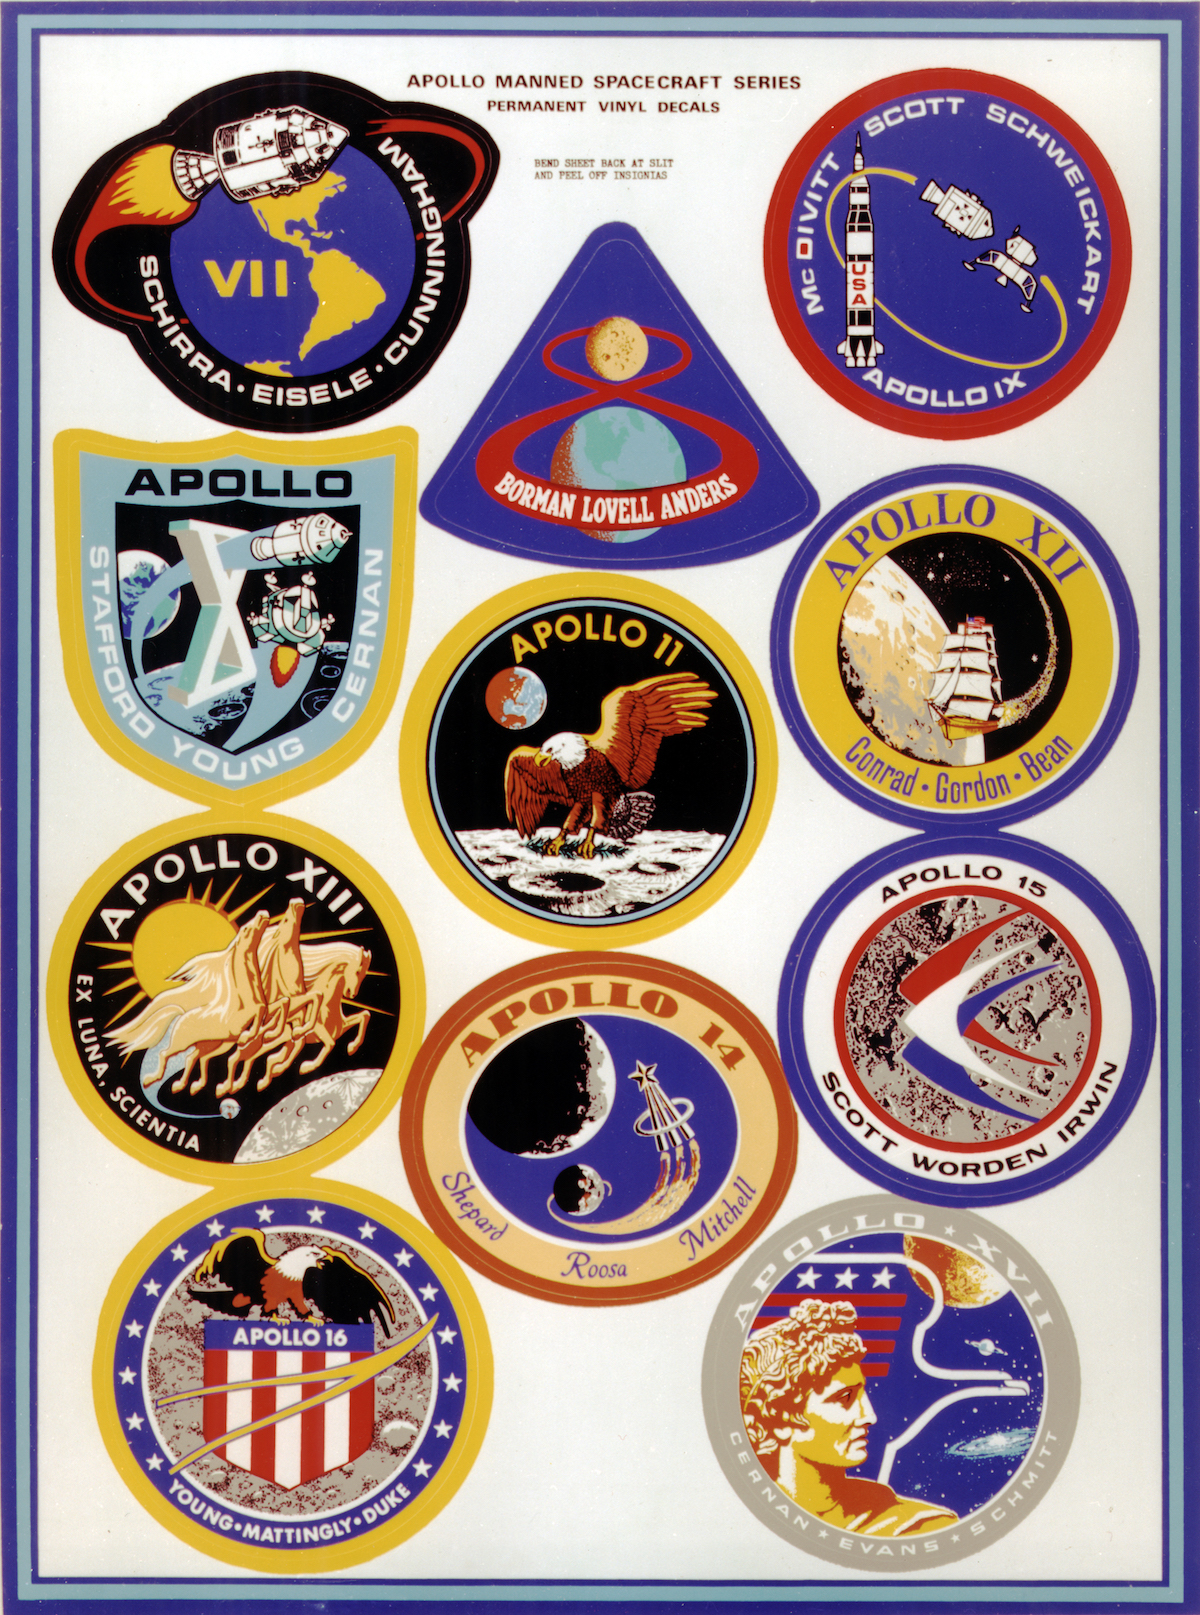 Series of patches worn by Apollo astronauts.